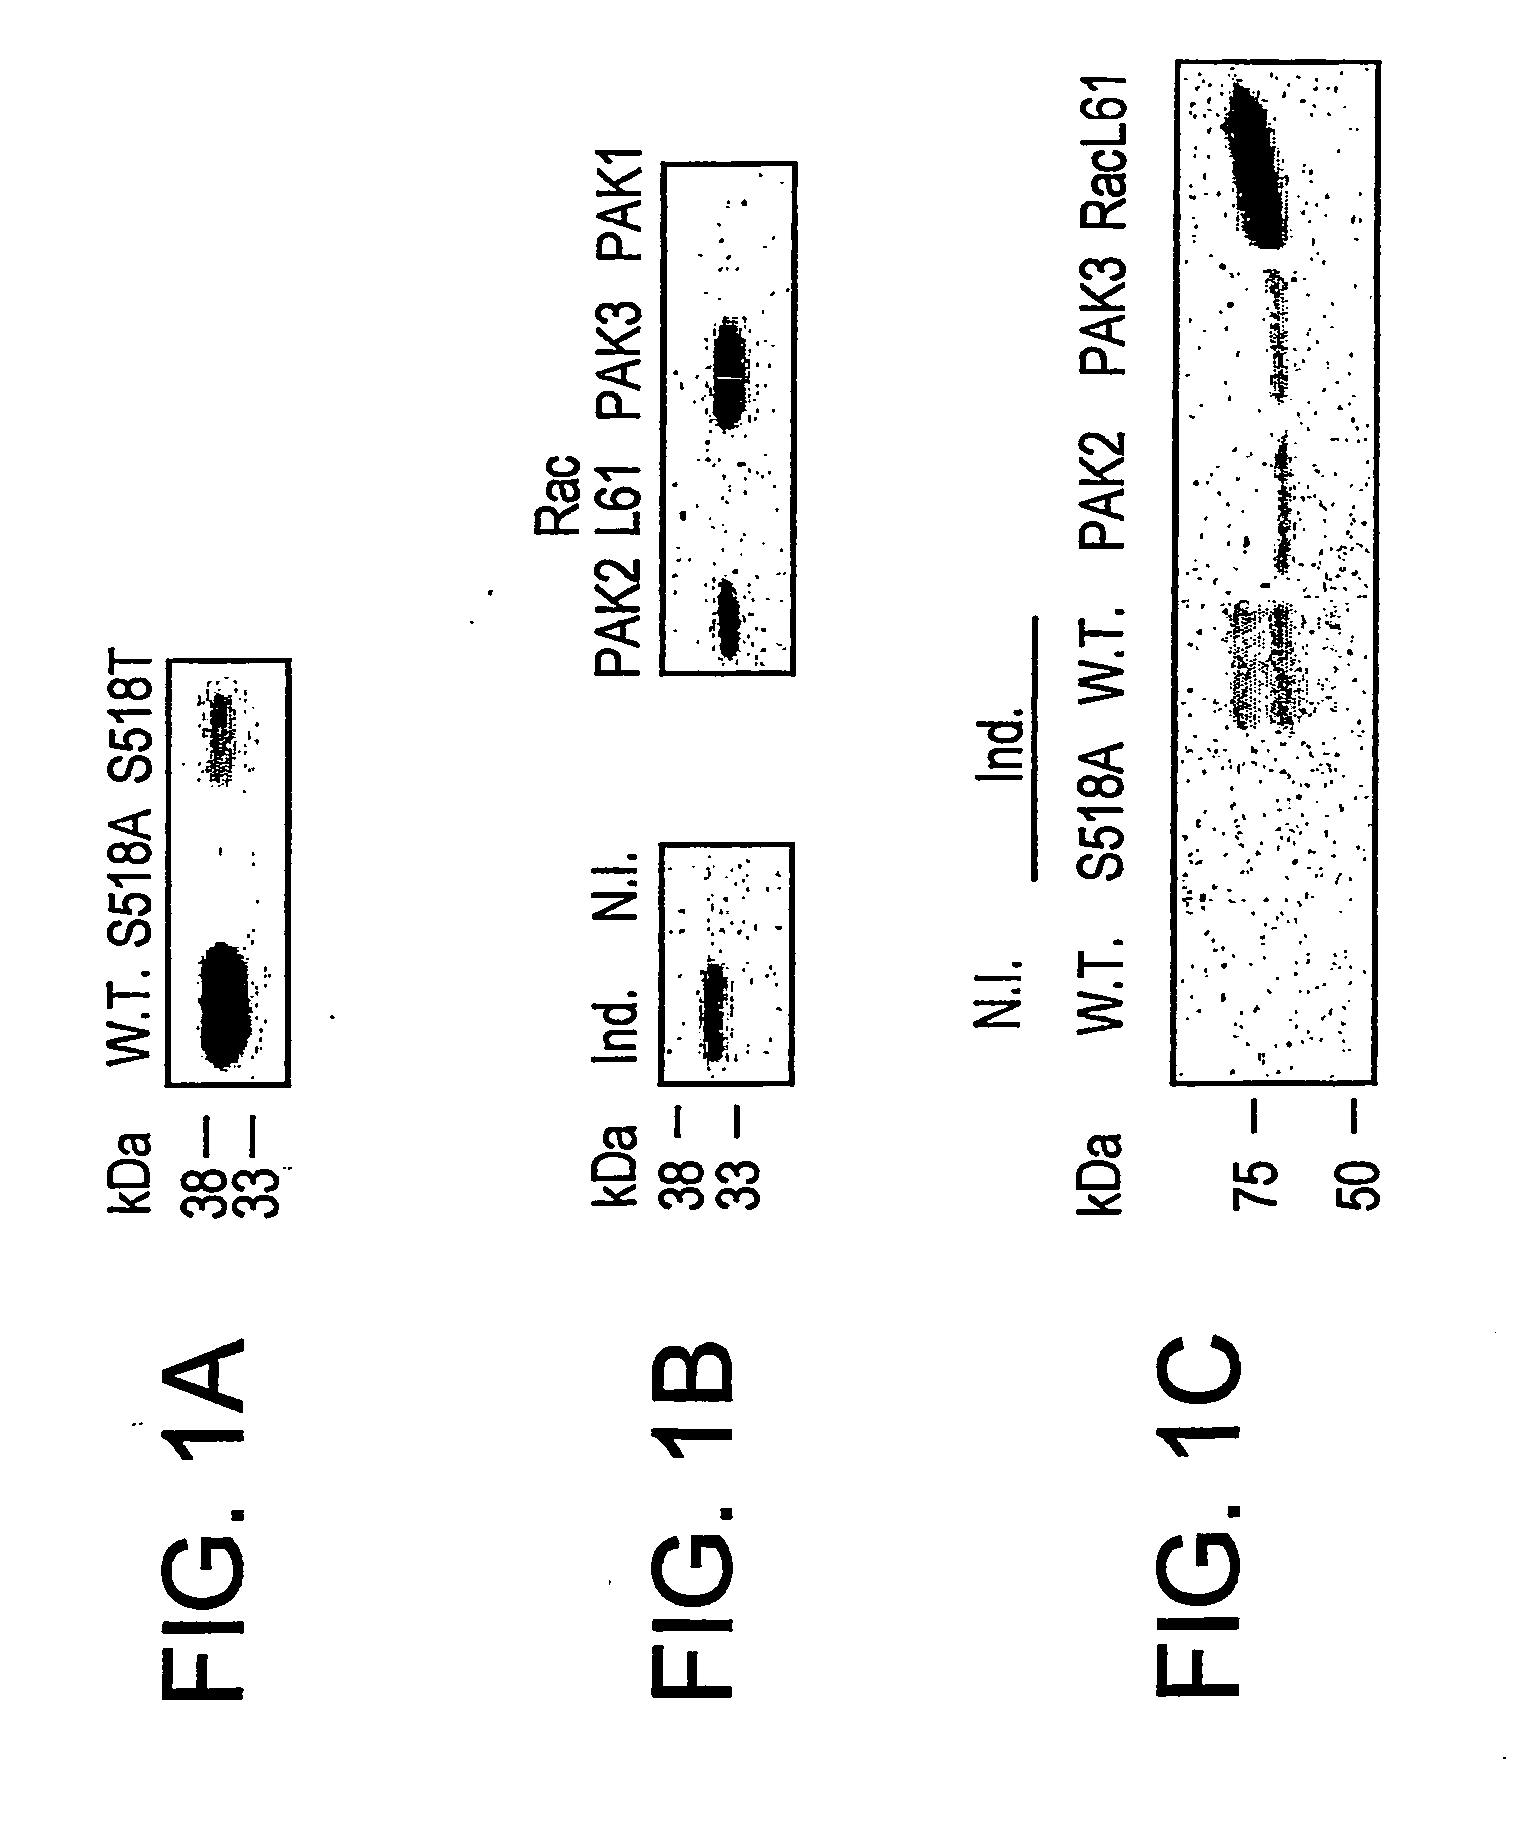 Methods for the treatment and prevention of cancer